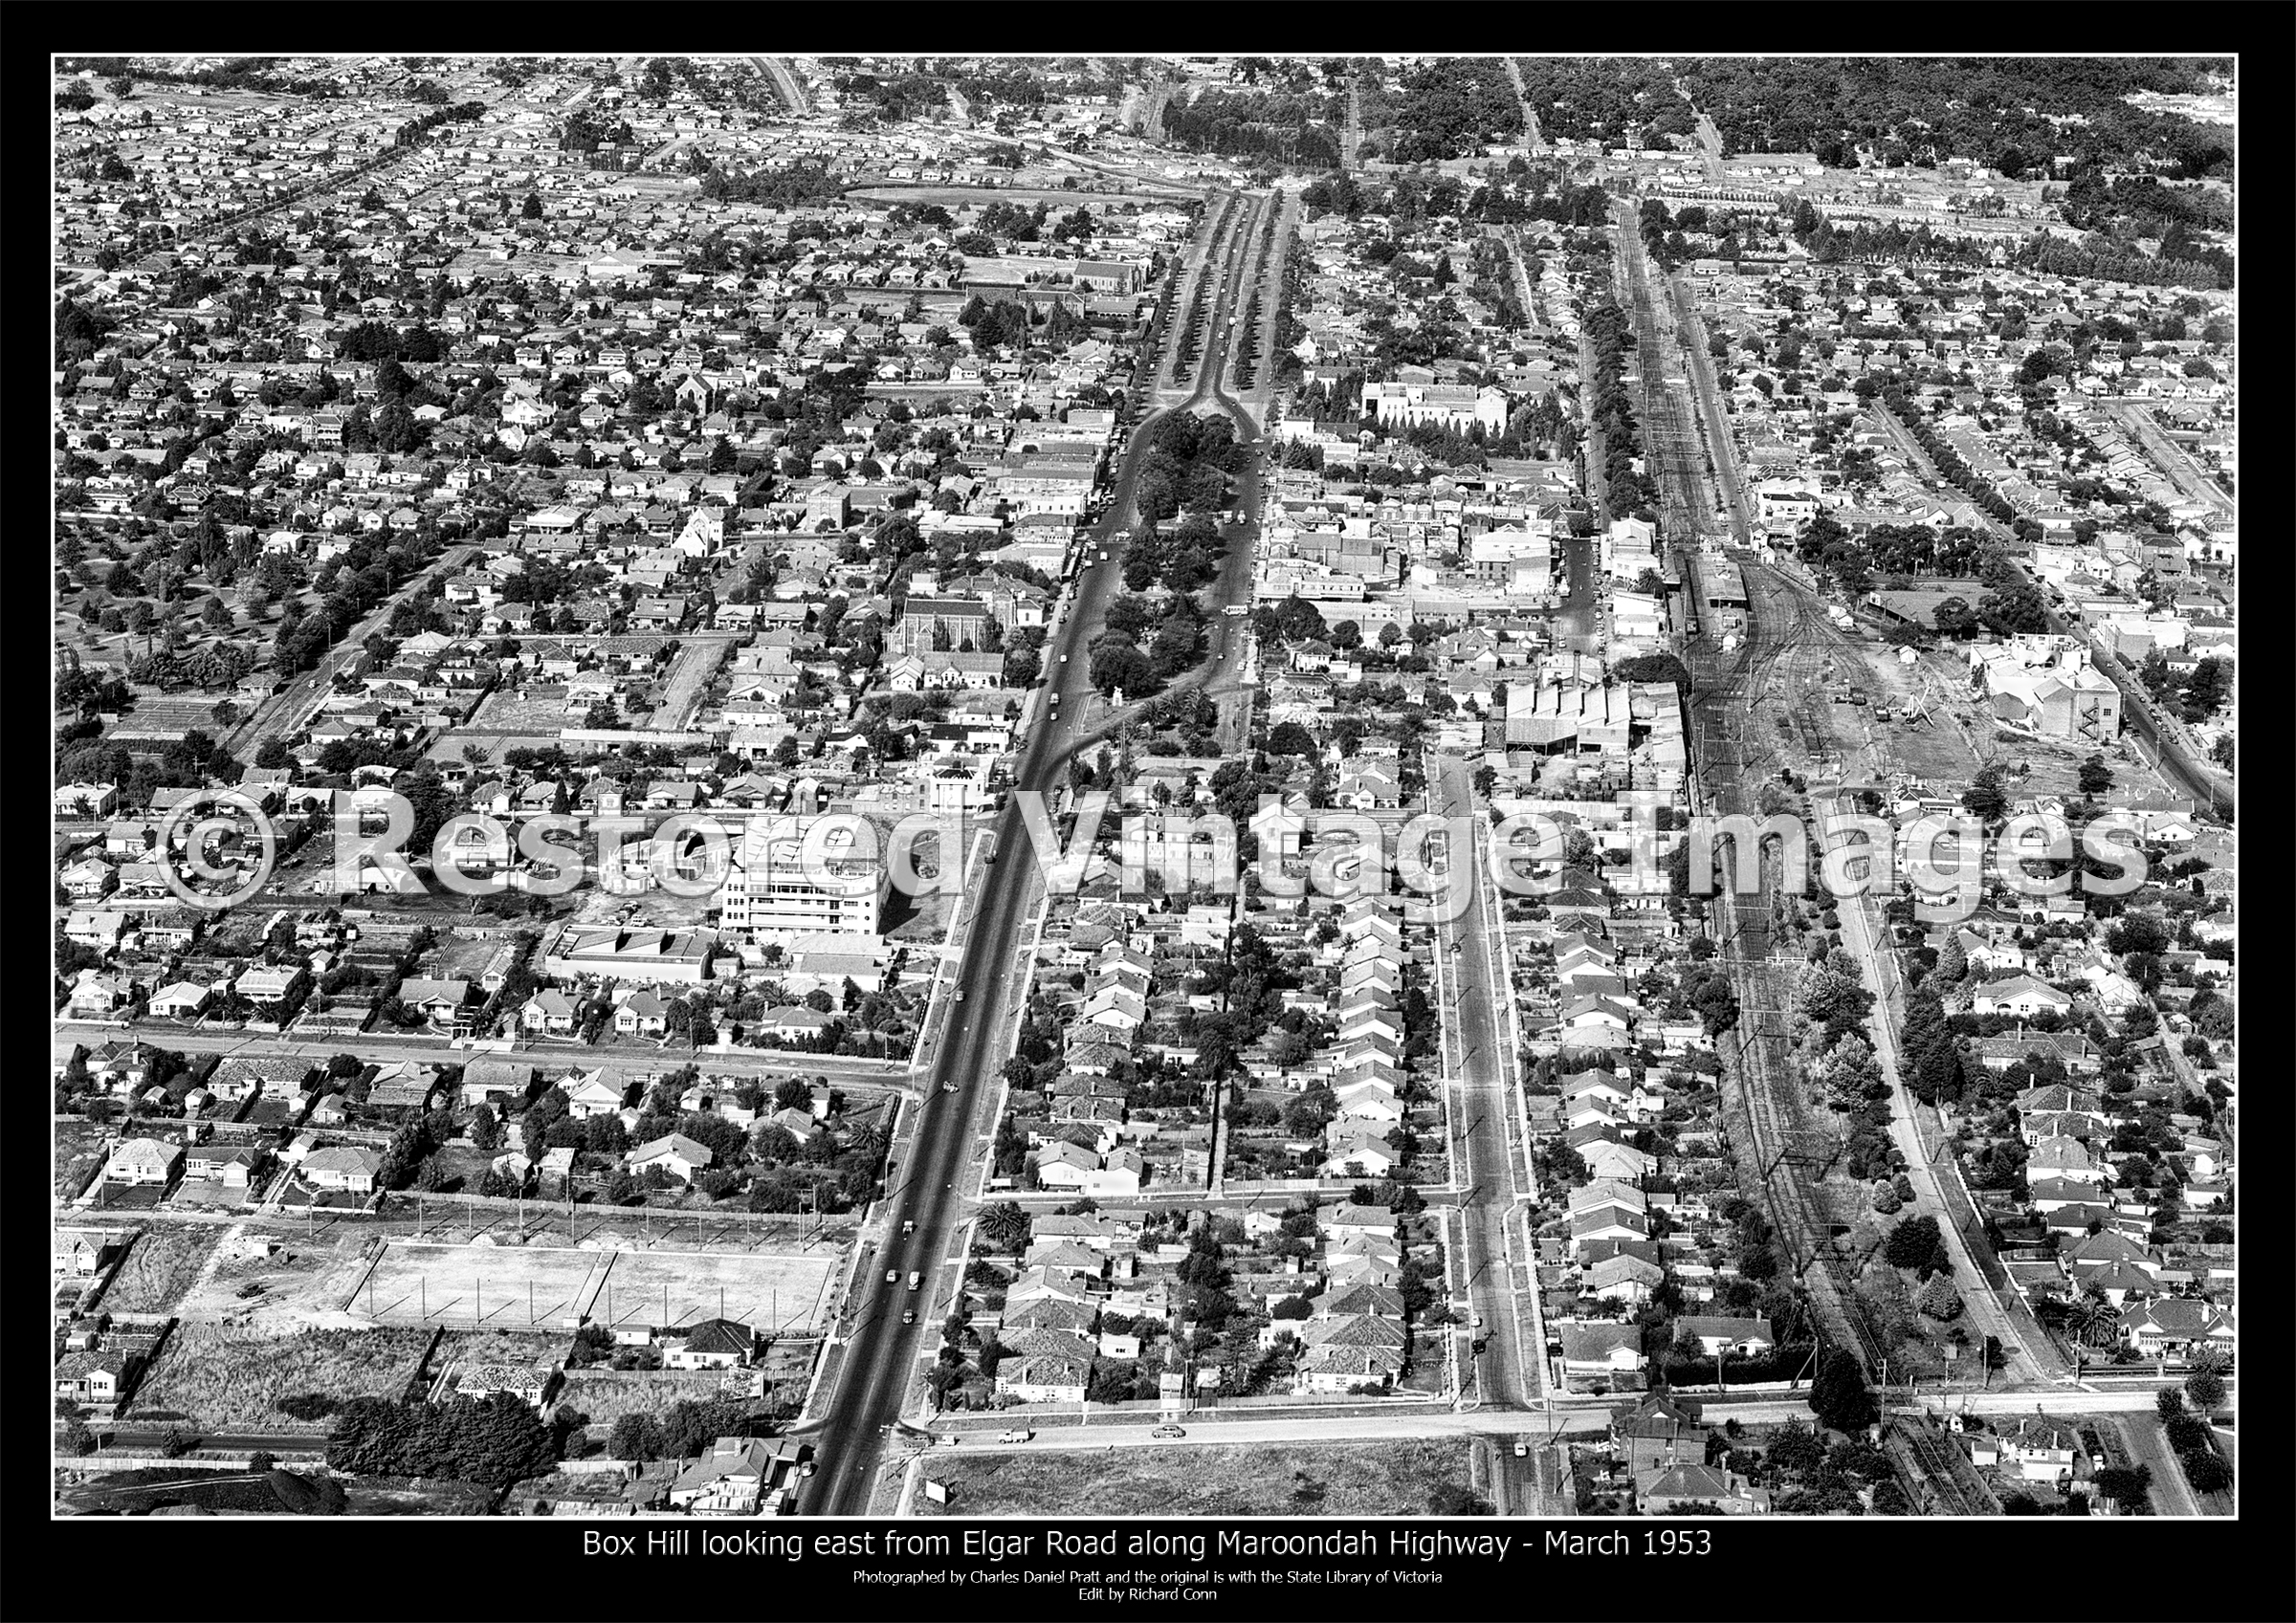 Box Hill Looking East From Over Elgar Road Along Maroondah Highway – March 1953